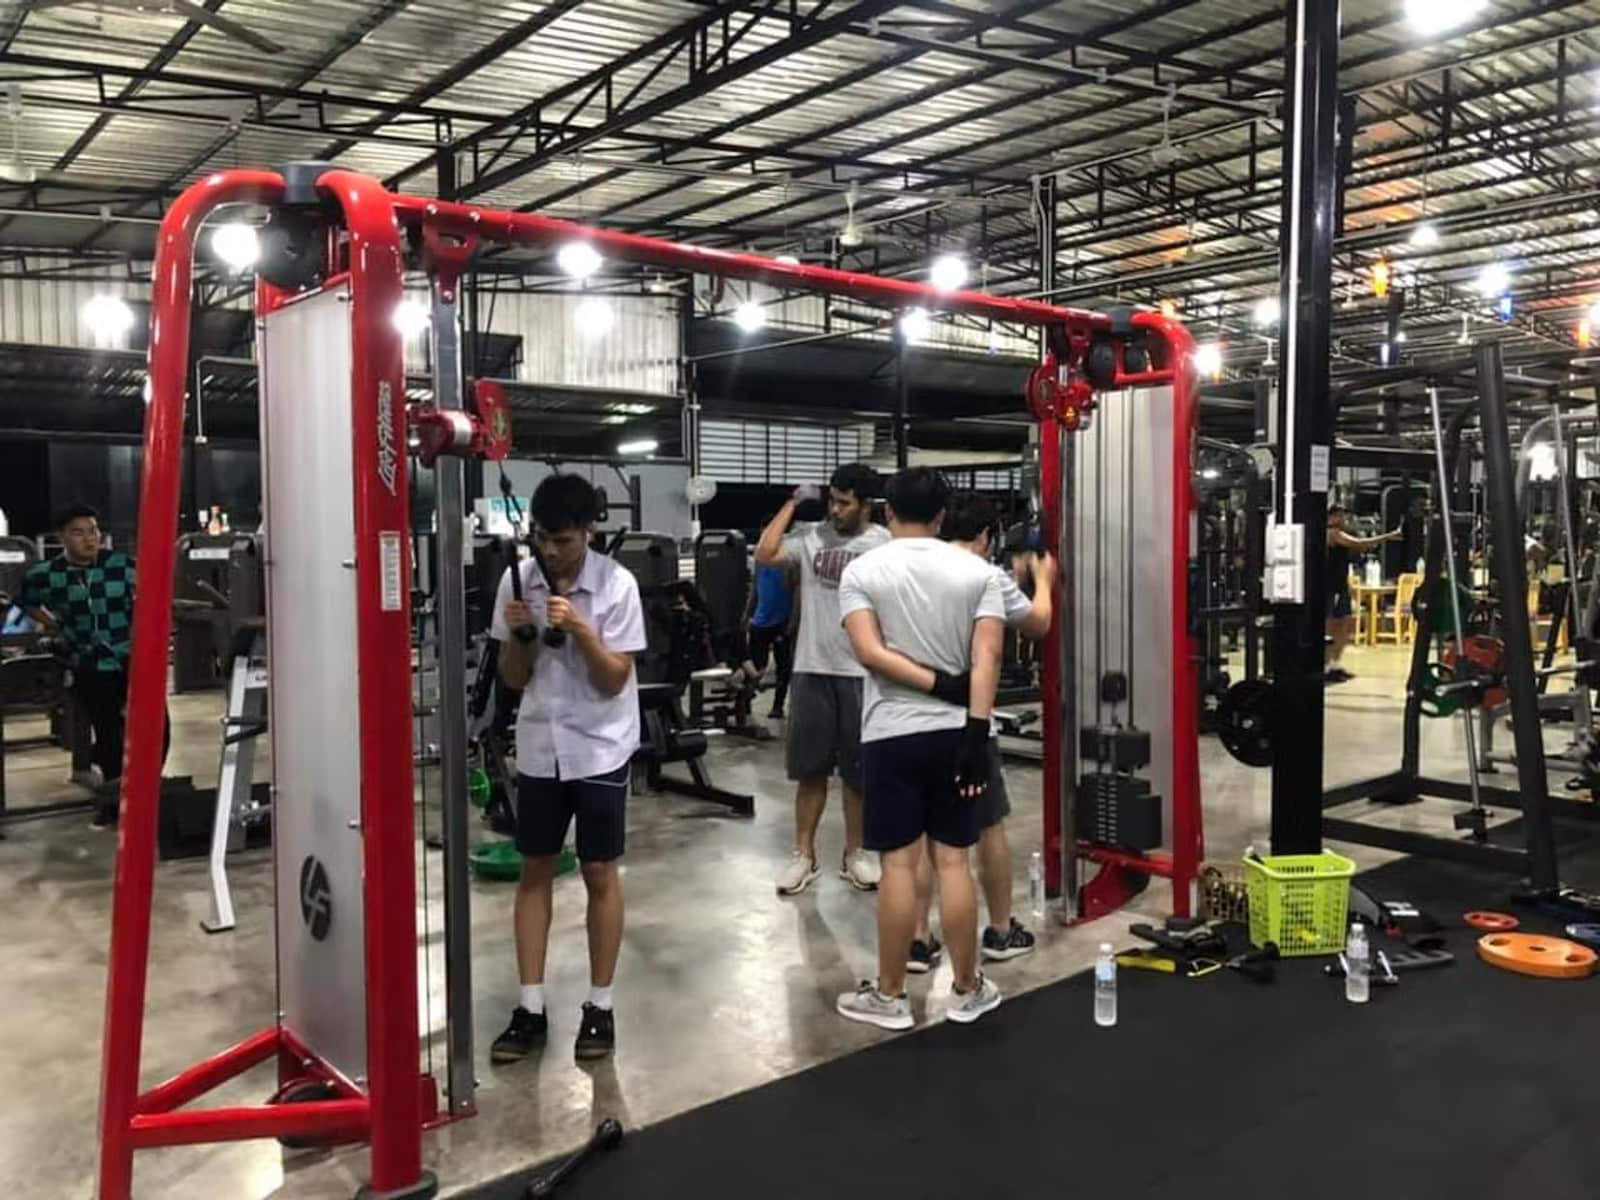 The Champion Gym in Surat Thani